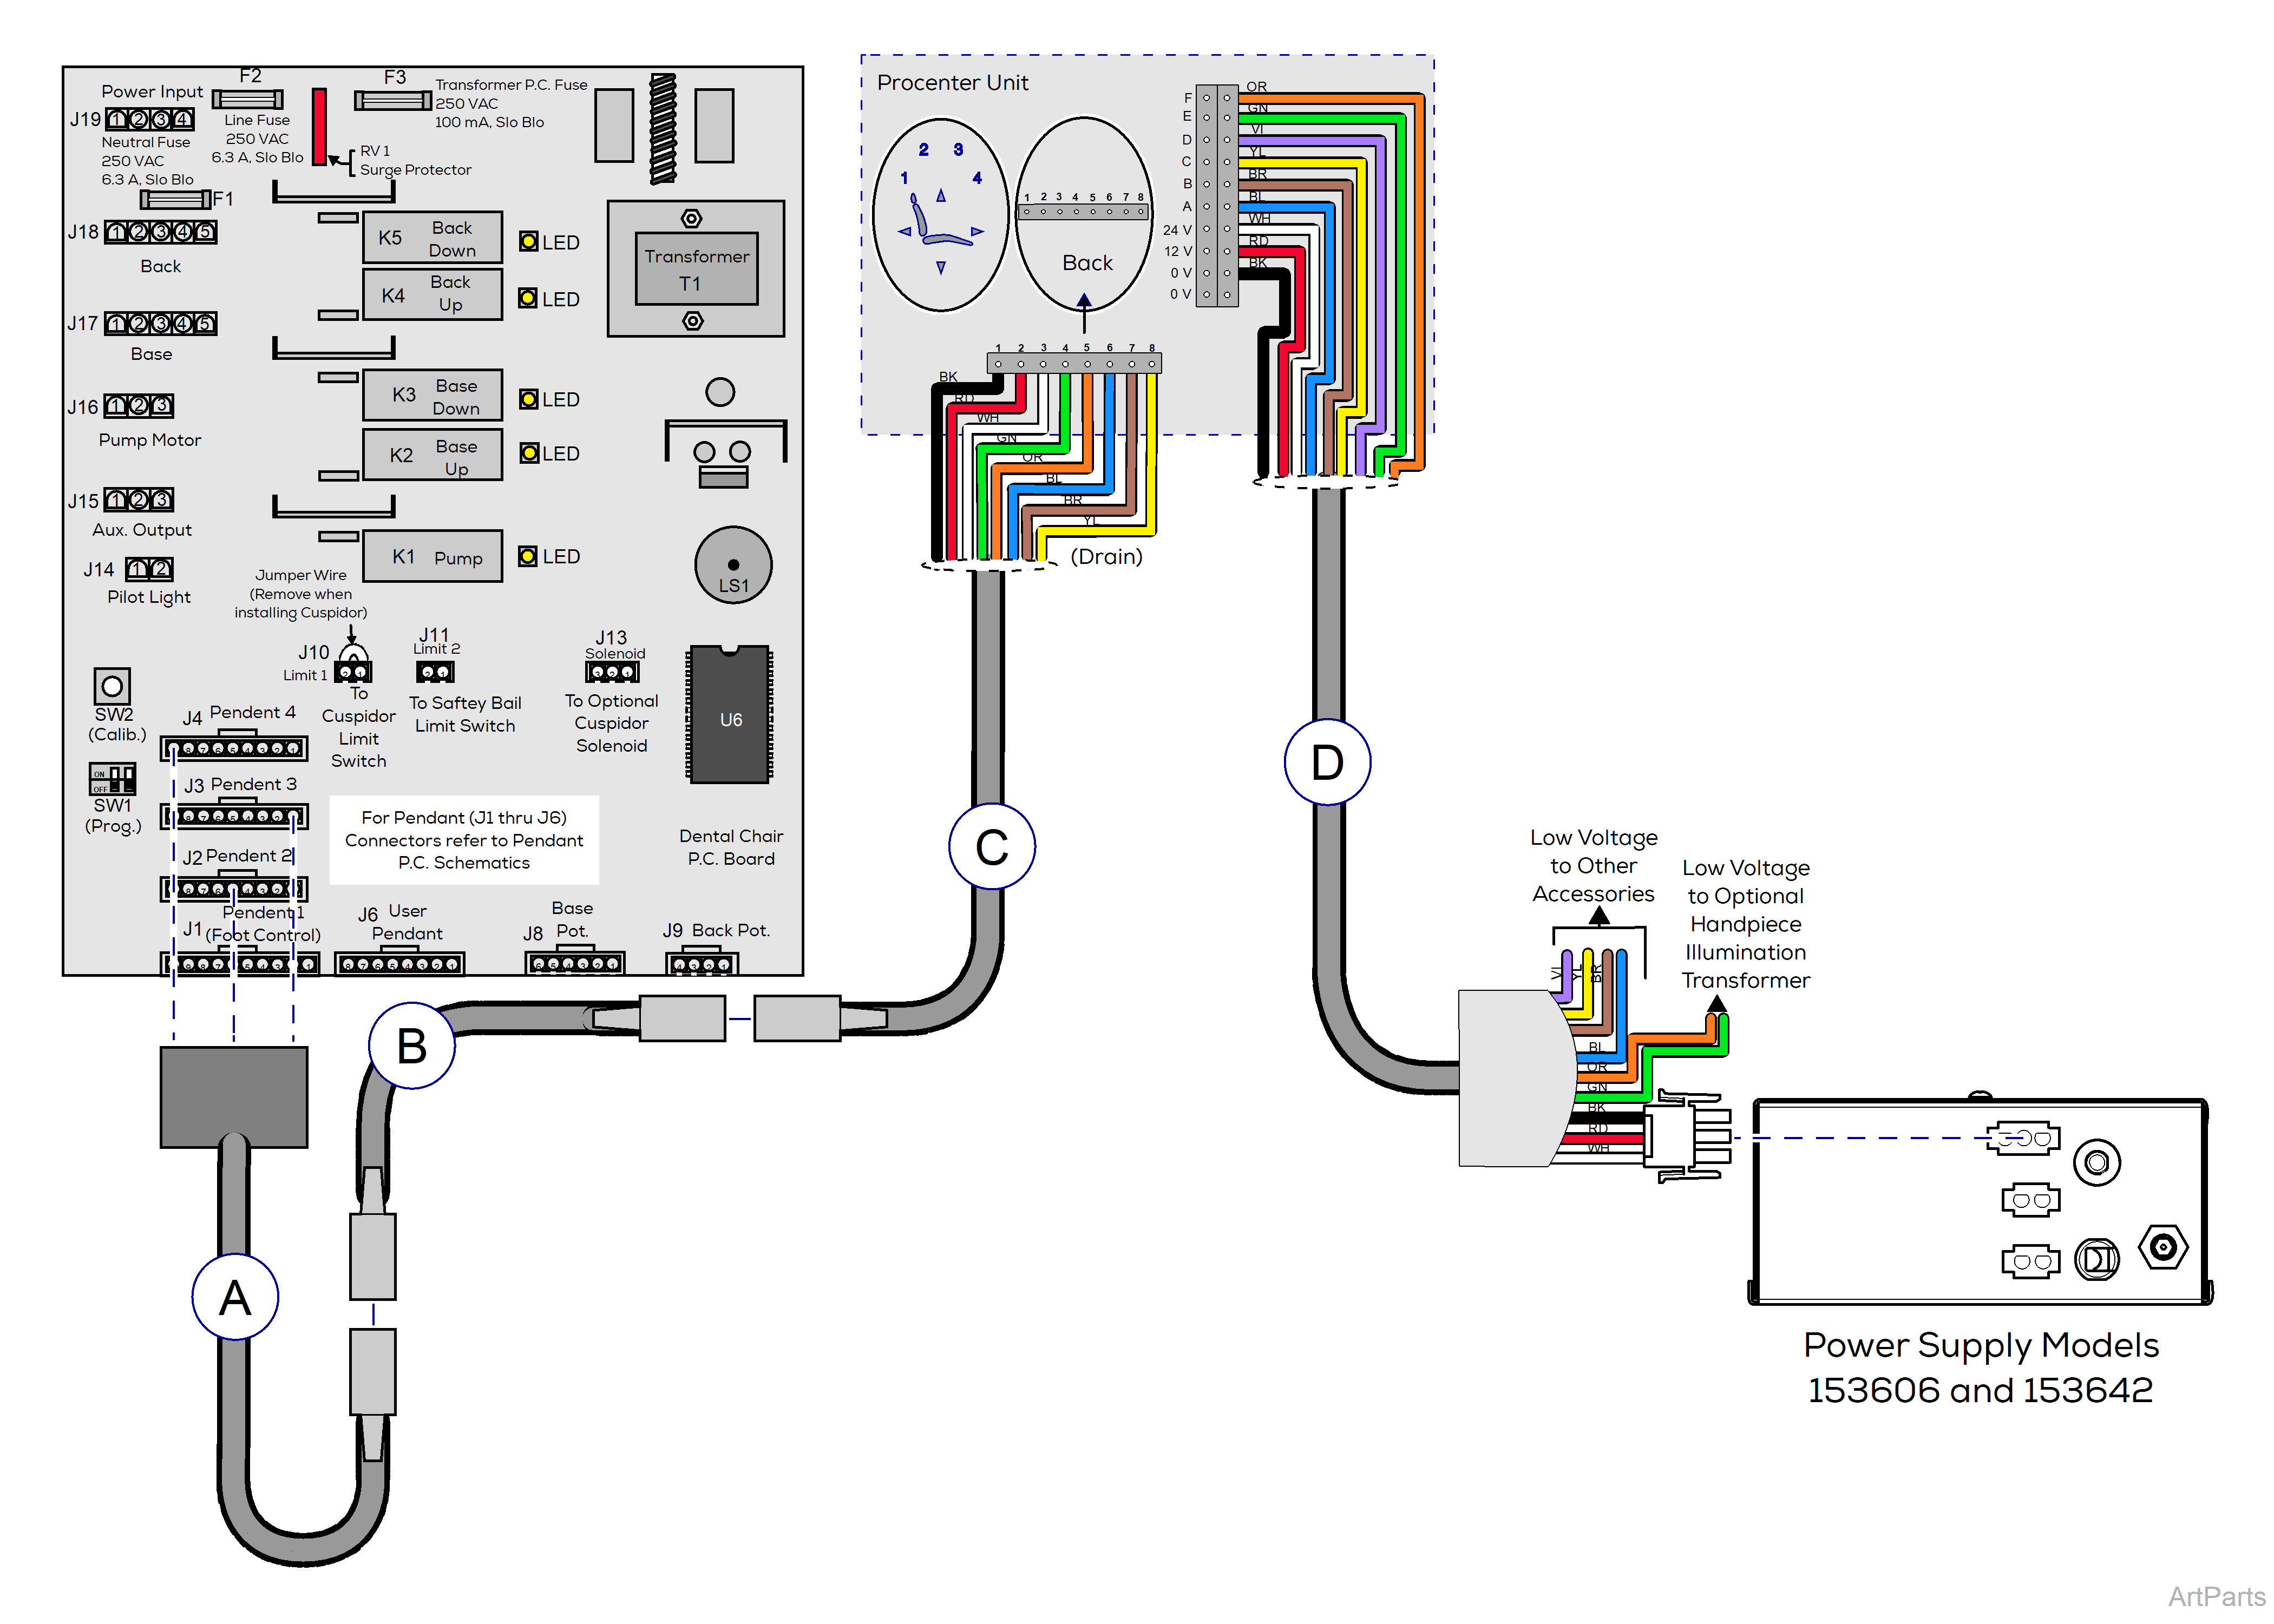 Procenter, Wall/Cabinet Mounted Wiring Diagram